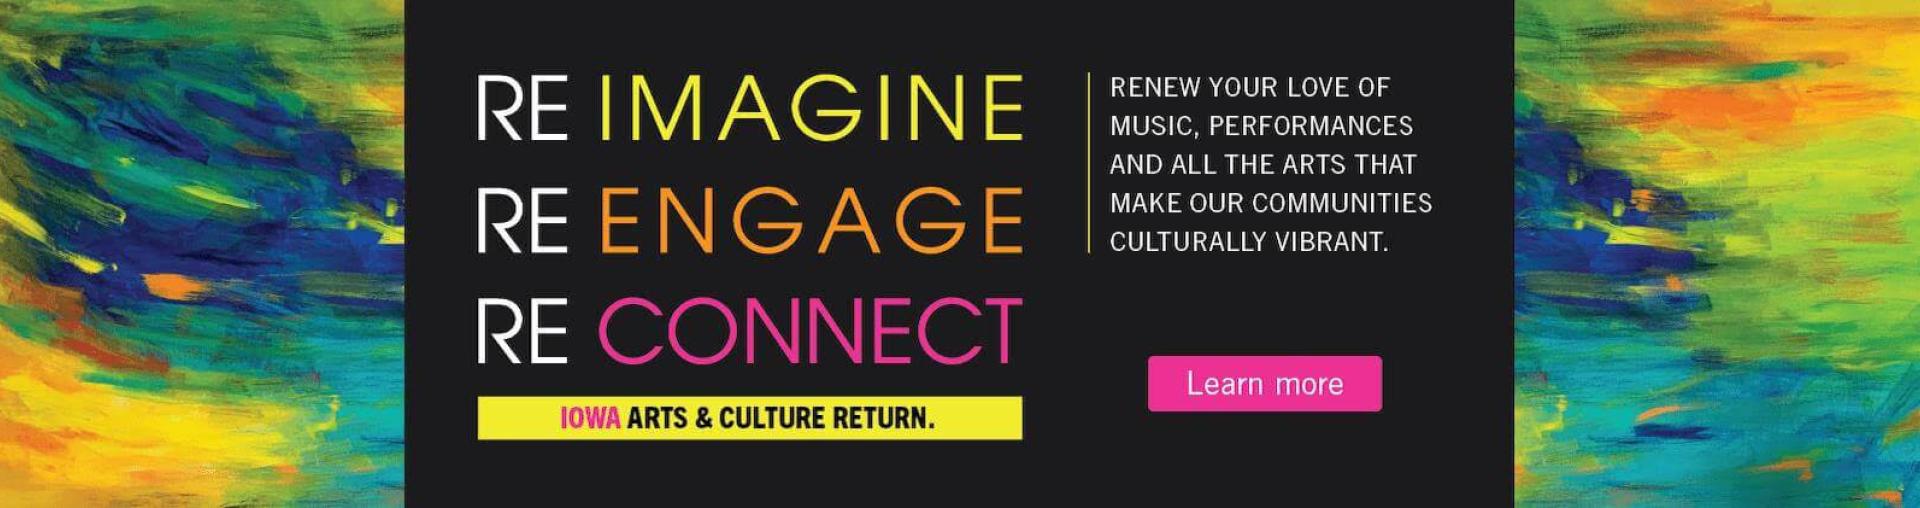 Re-imagine, Re-engage, Reconnect to arts and culture in Iowa